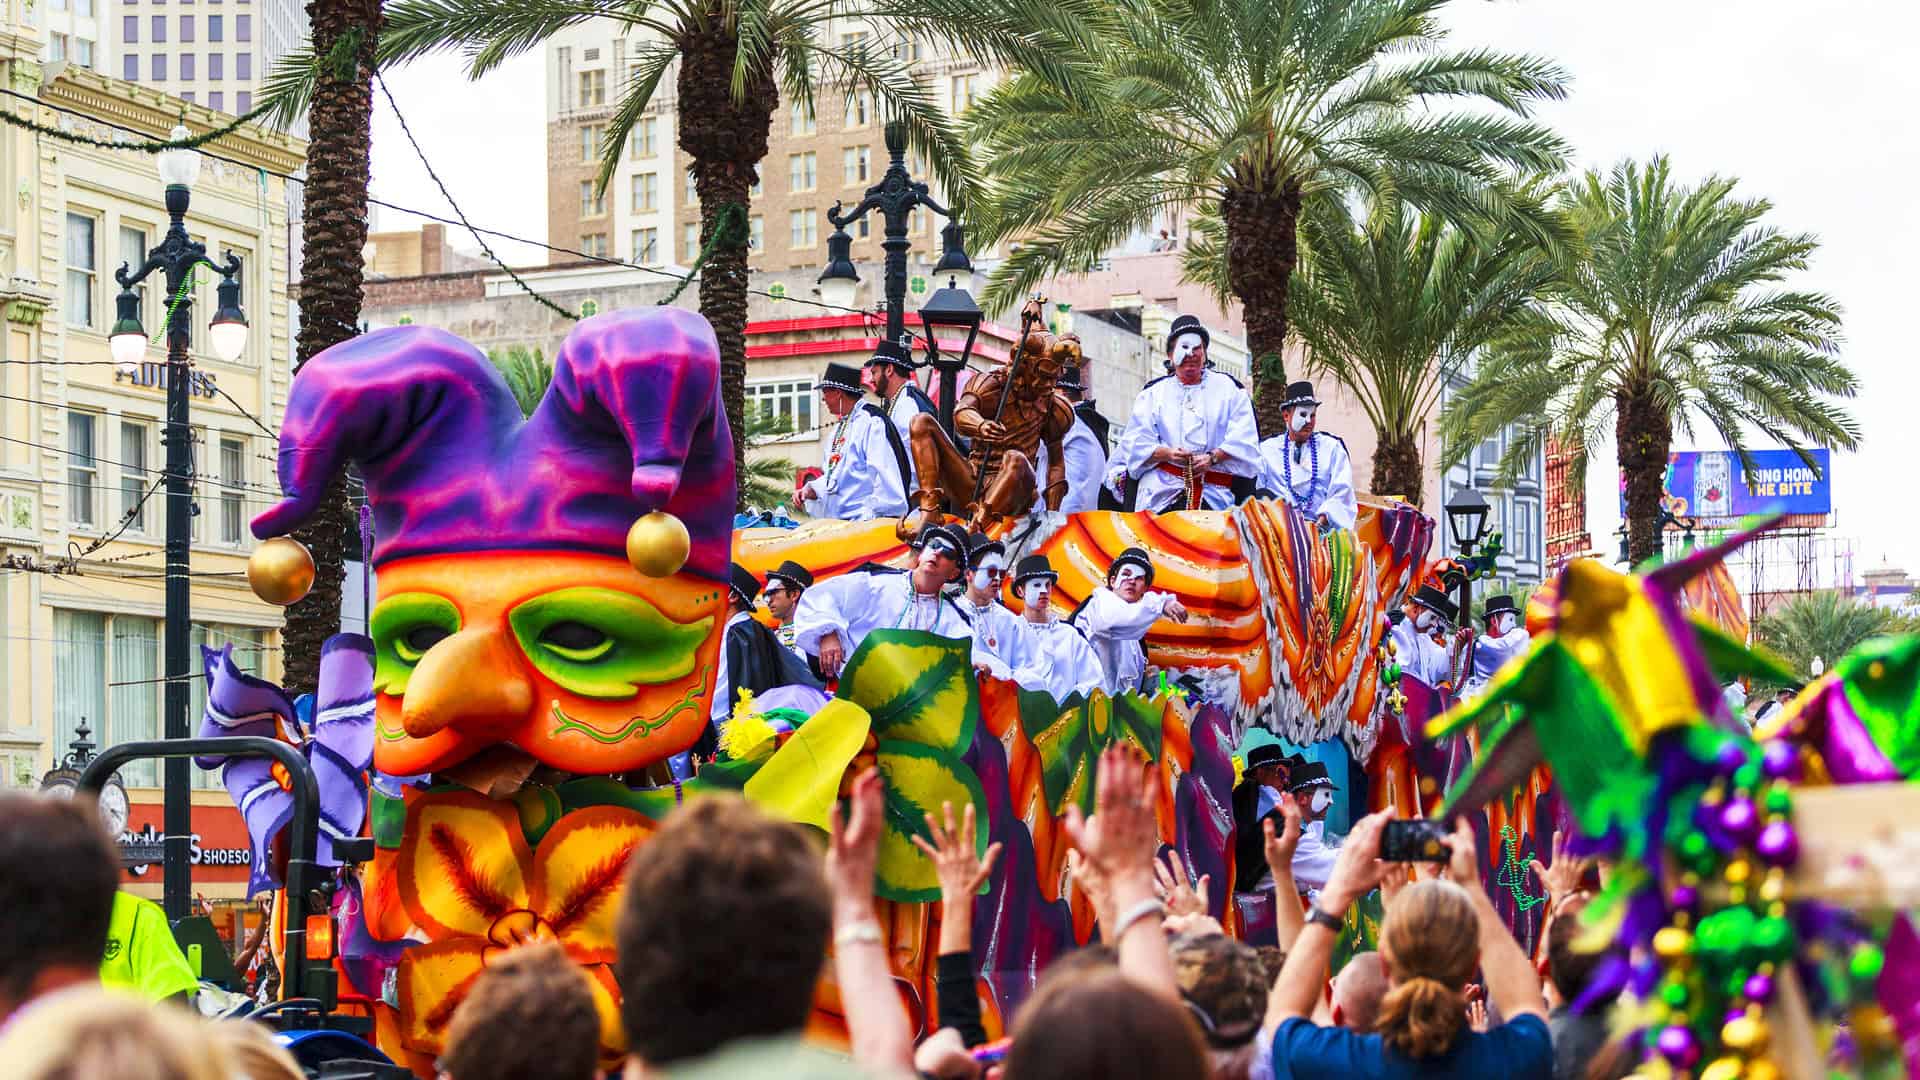 Mardi Gras parades through the streets of New Orleans with people cheering